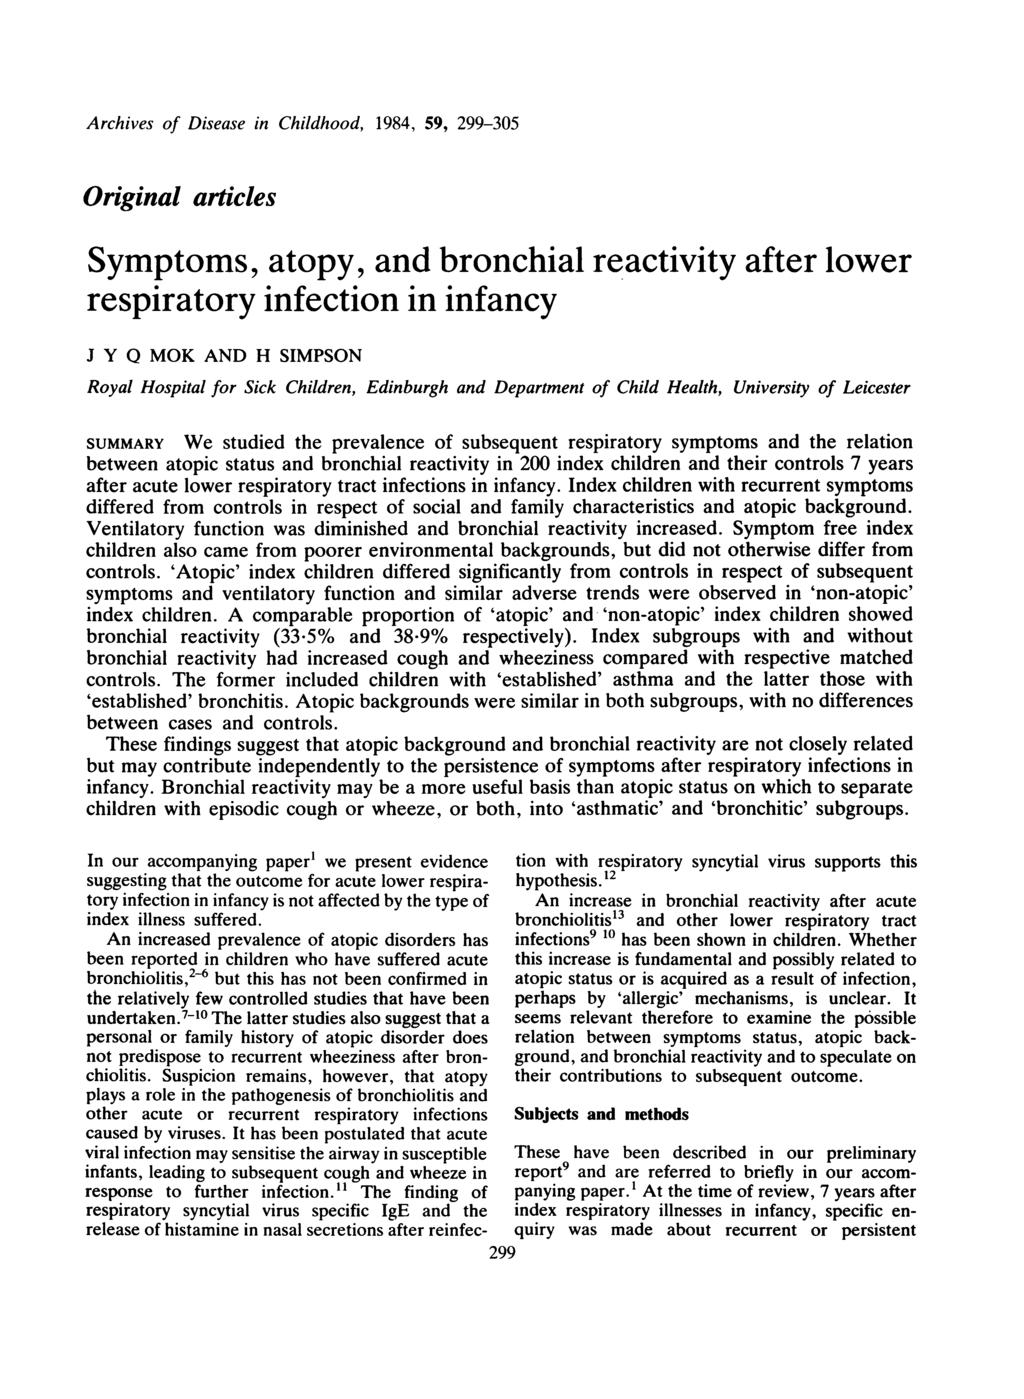 Archives of Disease in Childhood, 1984, 59, 299-305 Original articles Symptoms, atopy, and bronchial reactivity after lower respiratory infection in infancy J Y Q MOK AND H SIMPSON Royal Hospital for